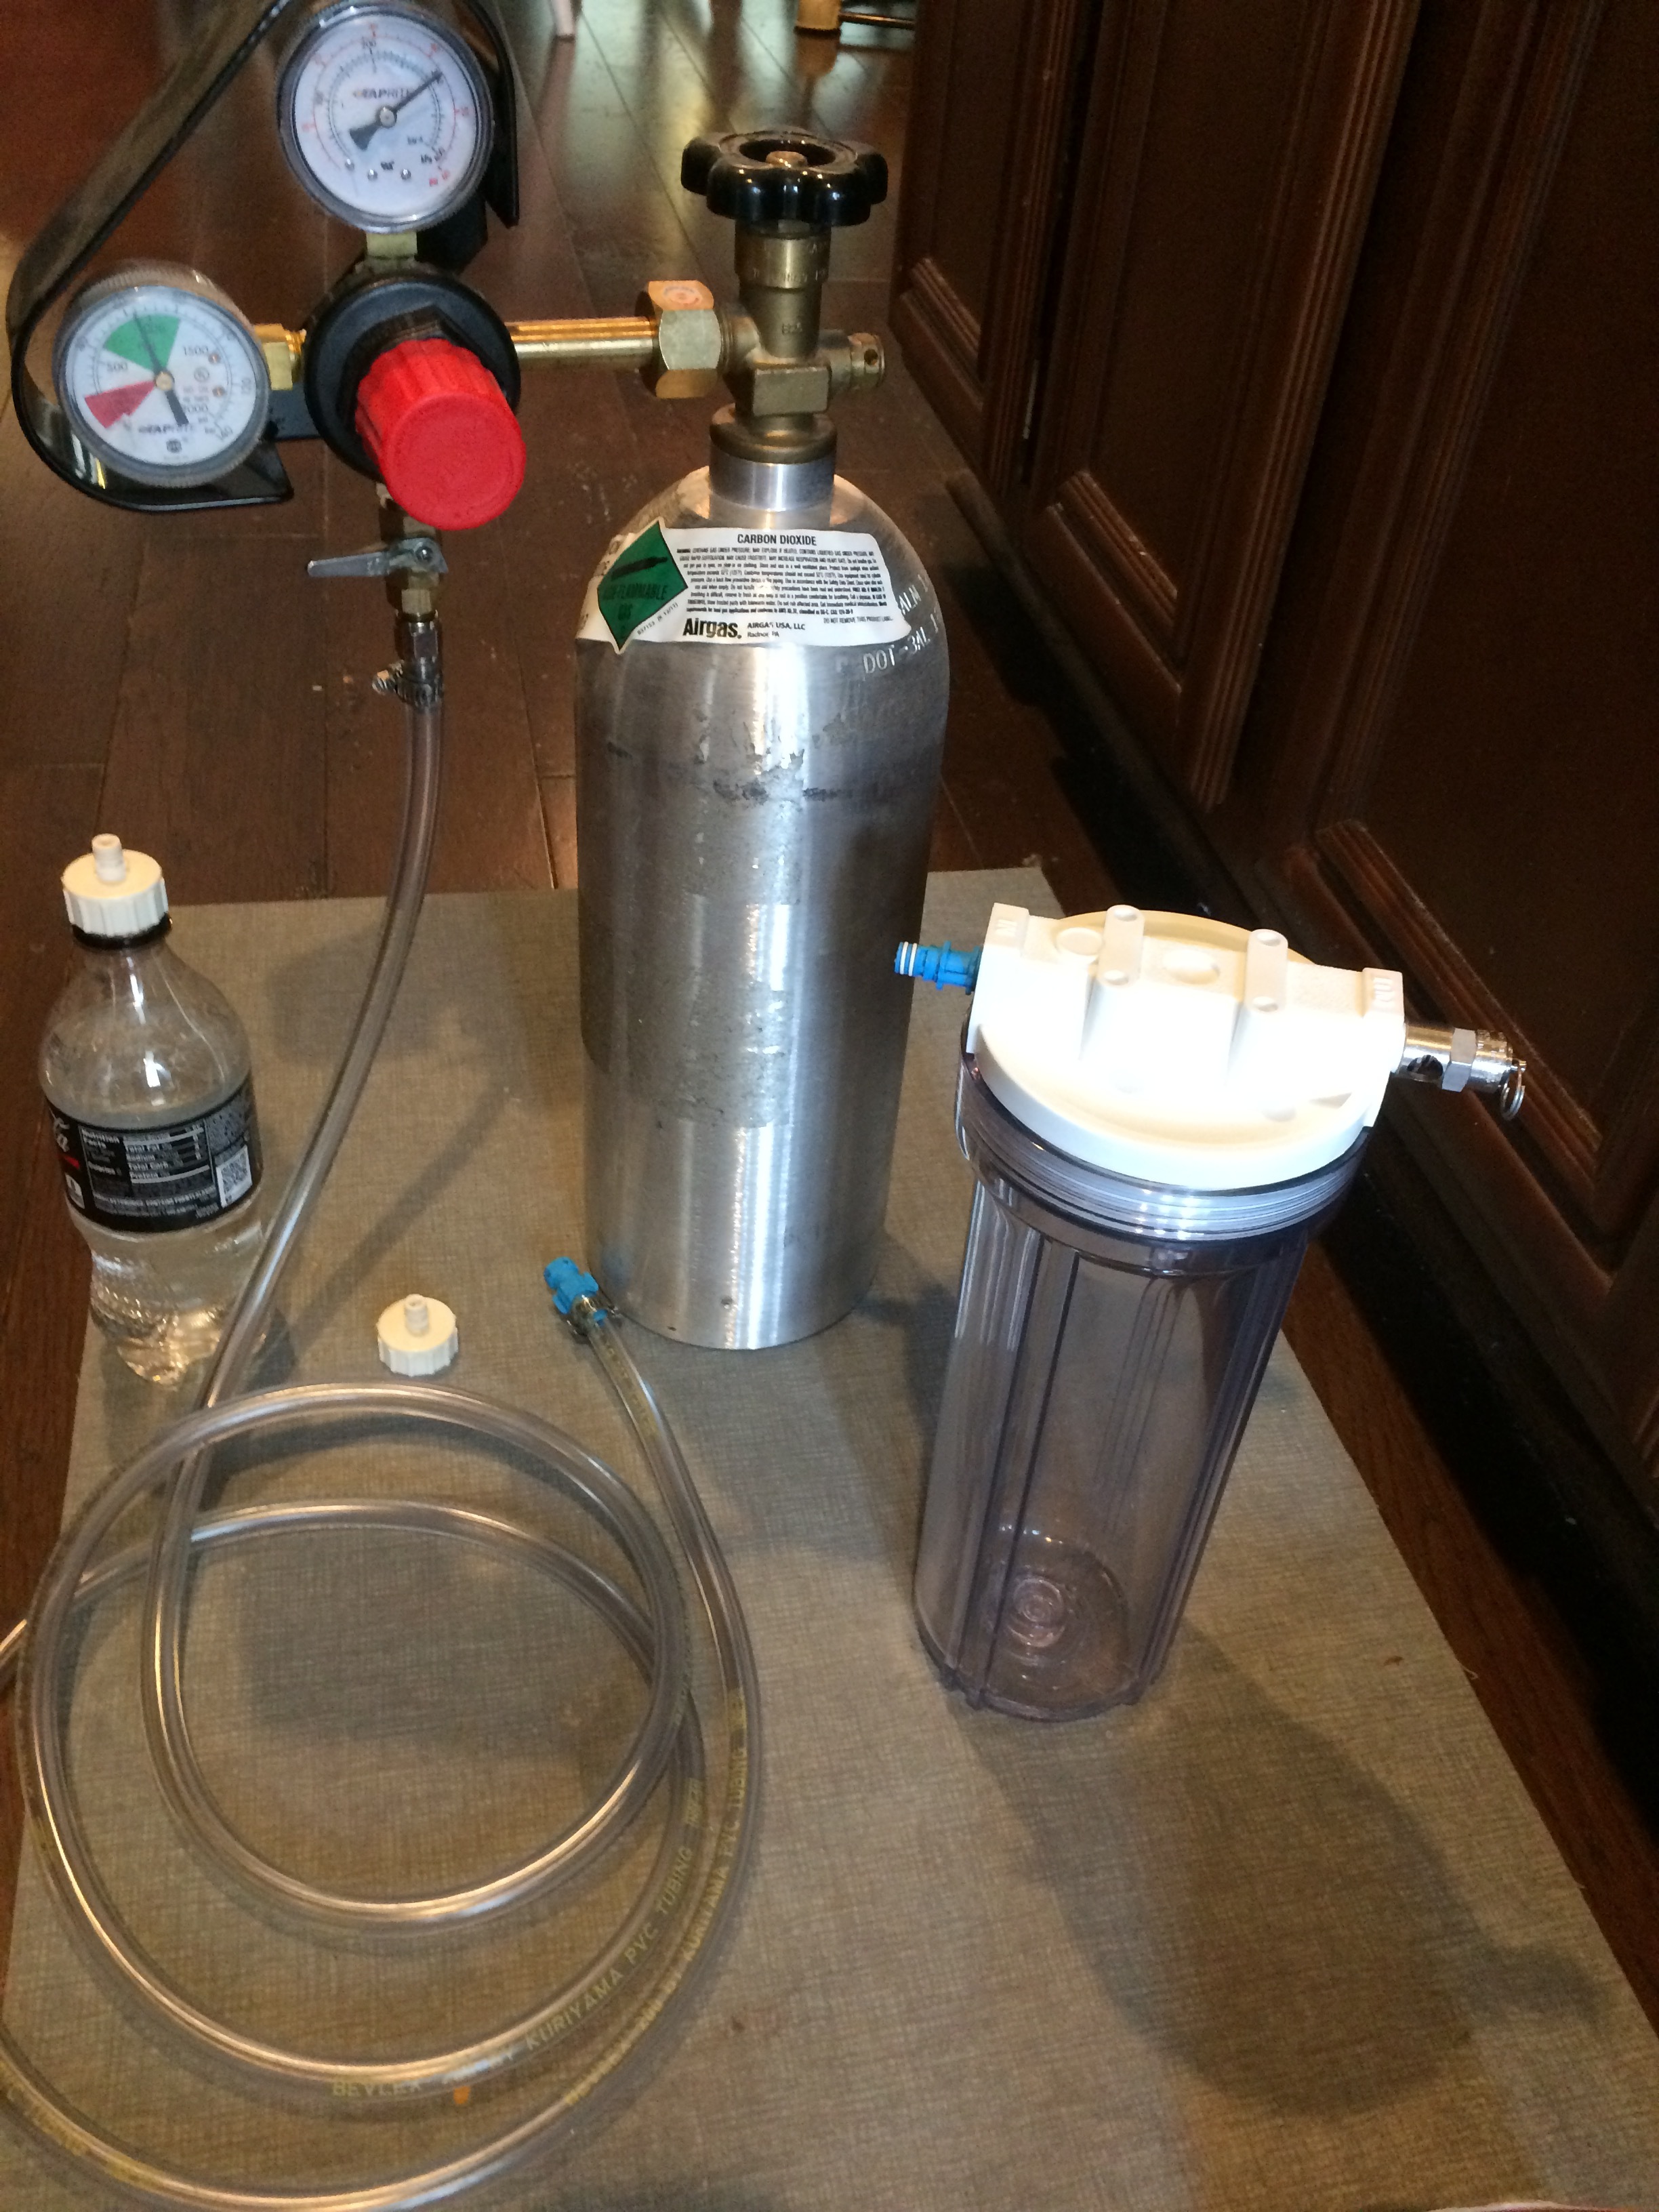  Full kit, plus a 5lb CO2 tank from a local homebrew supply store. 